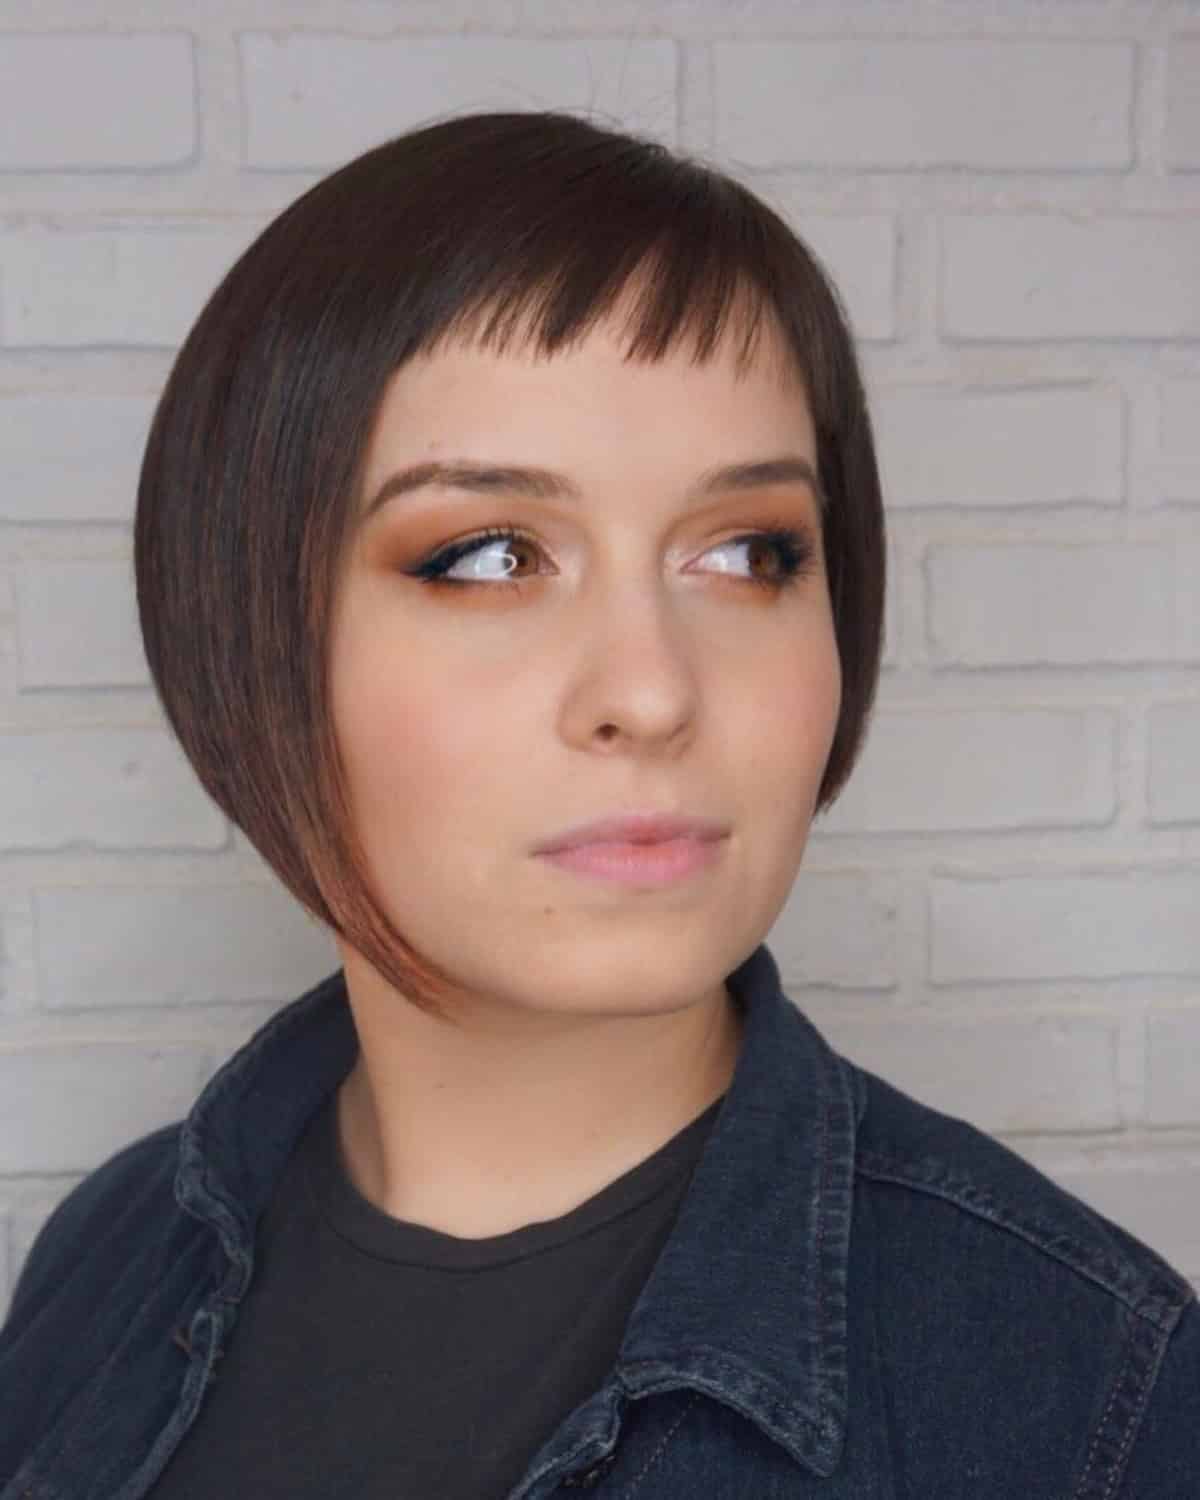 20 Asymmetrical Bob with Bangs That Are Stylishly Edgy